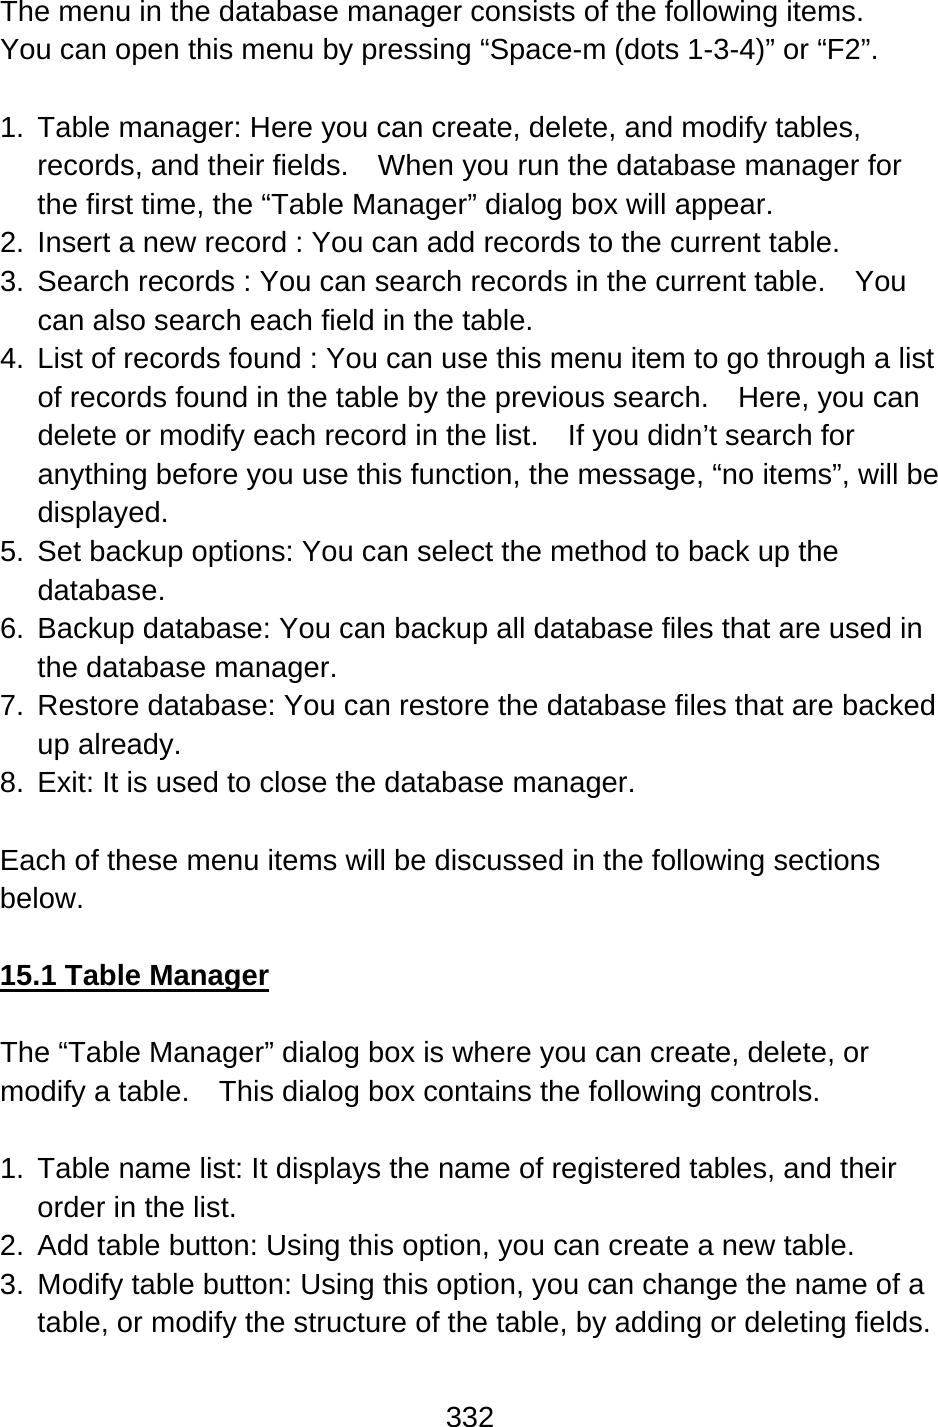 332  The menu in the database manager consists of the following items.   You can open this menu by pressing “Space-m (dots 1-3-4)” or “F2”.  1.  Table manager: Here you can create, delete, and modify tables, records, and their fields.    When you run the database manager for the first time, the “Table Manager” dialog box will appear. 2.  Insert a new record : You can add records to the current table. 3.  Search records : You can search records in the current table.    You can also search each field in the table. 4.  List of records found : You can use this menu item to go through a list of records found in the table by the previous search.    Here, you can delete or modify each record in the list.    If you didn’t search for anything before you use this function, the message, “no items”, will be displayed. 5.  Set backup options: You can select the method to back up the database. 6.  Backup database: You can backup all database files that are used in the database manager. 7.  Restore database: You can restore the database files that are backed up already. 8.  Exit: It is used to close the database manager.  Each of these menu items will be discussed in the following sections below.  15.1 Table Manager  The “Table Manager” dialog box is where you can create, delete, or modify a table.    This dialog box contains the following controls.  1.  Table name list: It displays the name of registered tables, and their order in the list. 2.  Add table button: Using this option, you can create a new table. 3.  Modify table button: Using this option, you can change the name of a table, or modify the structure of the table, by adding or deleting fields. 